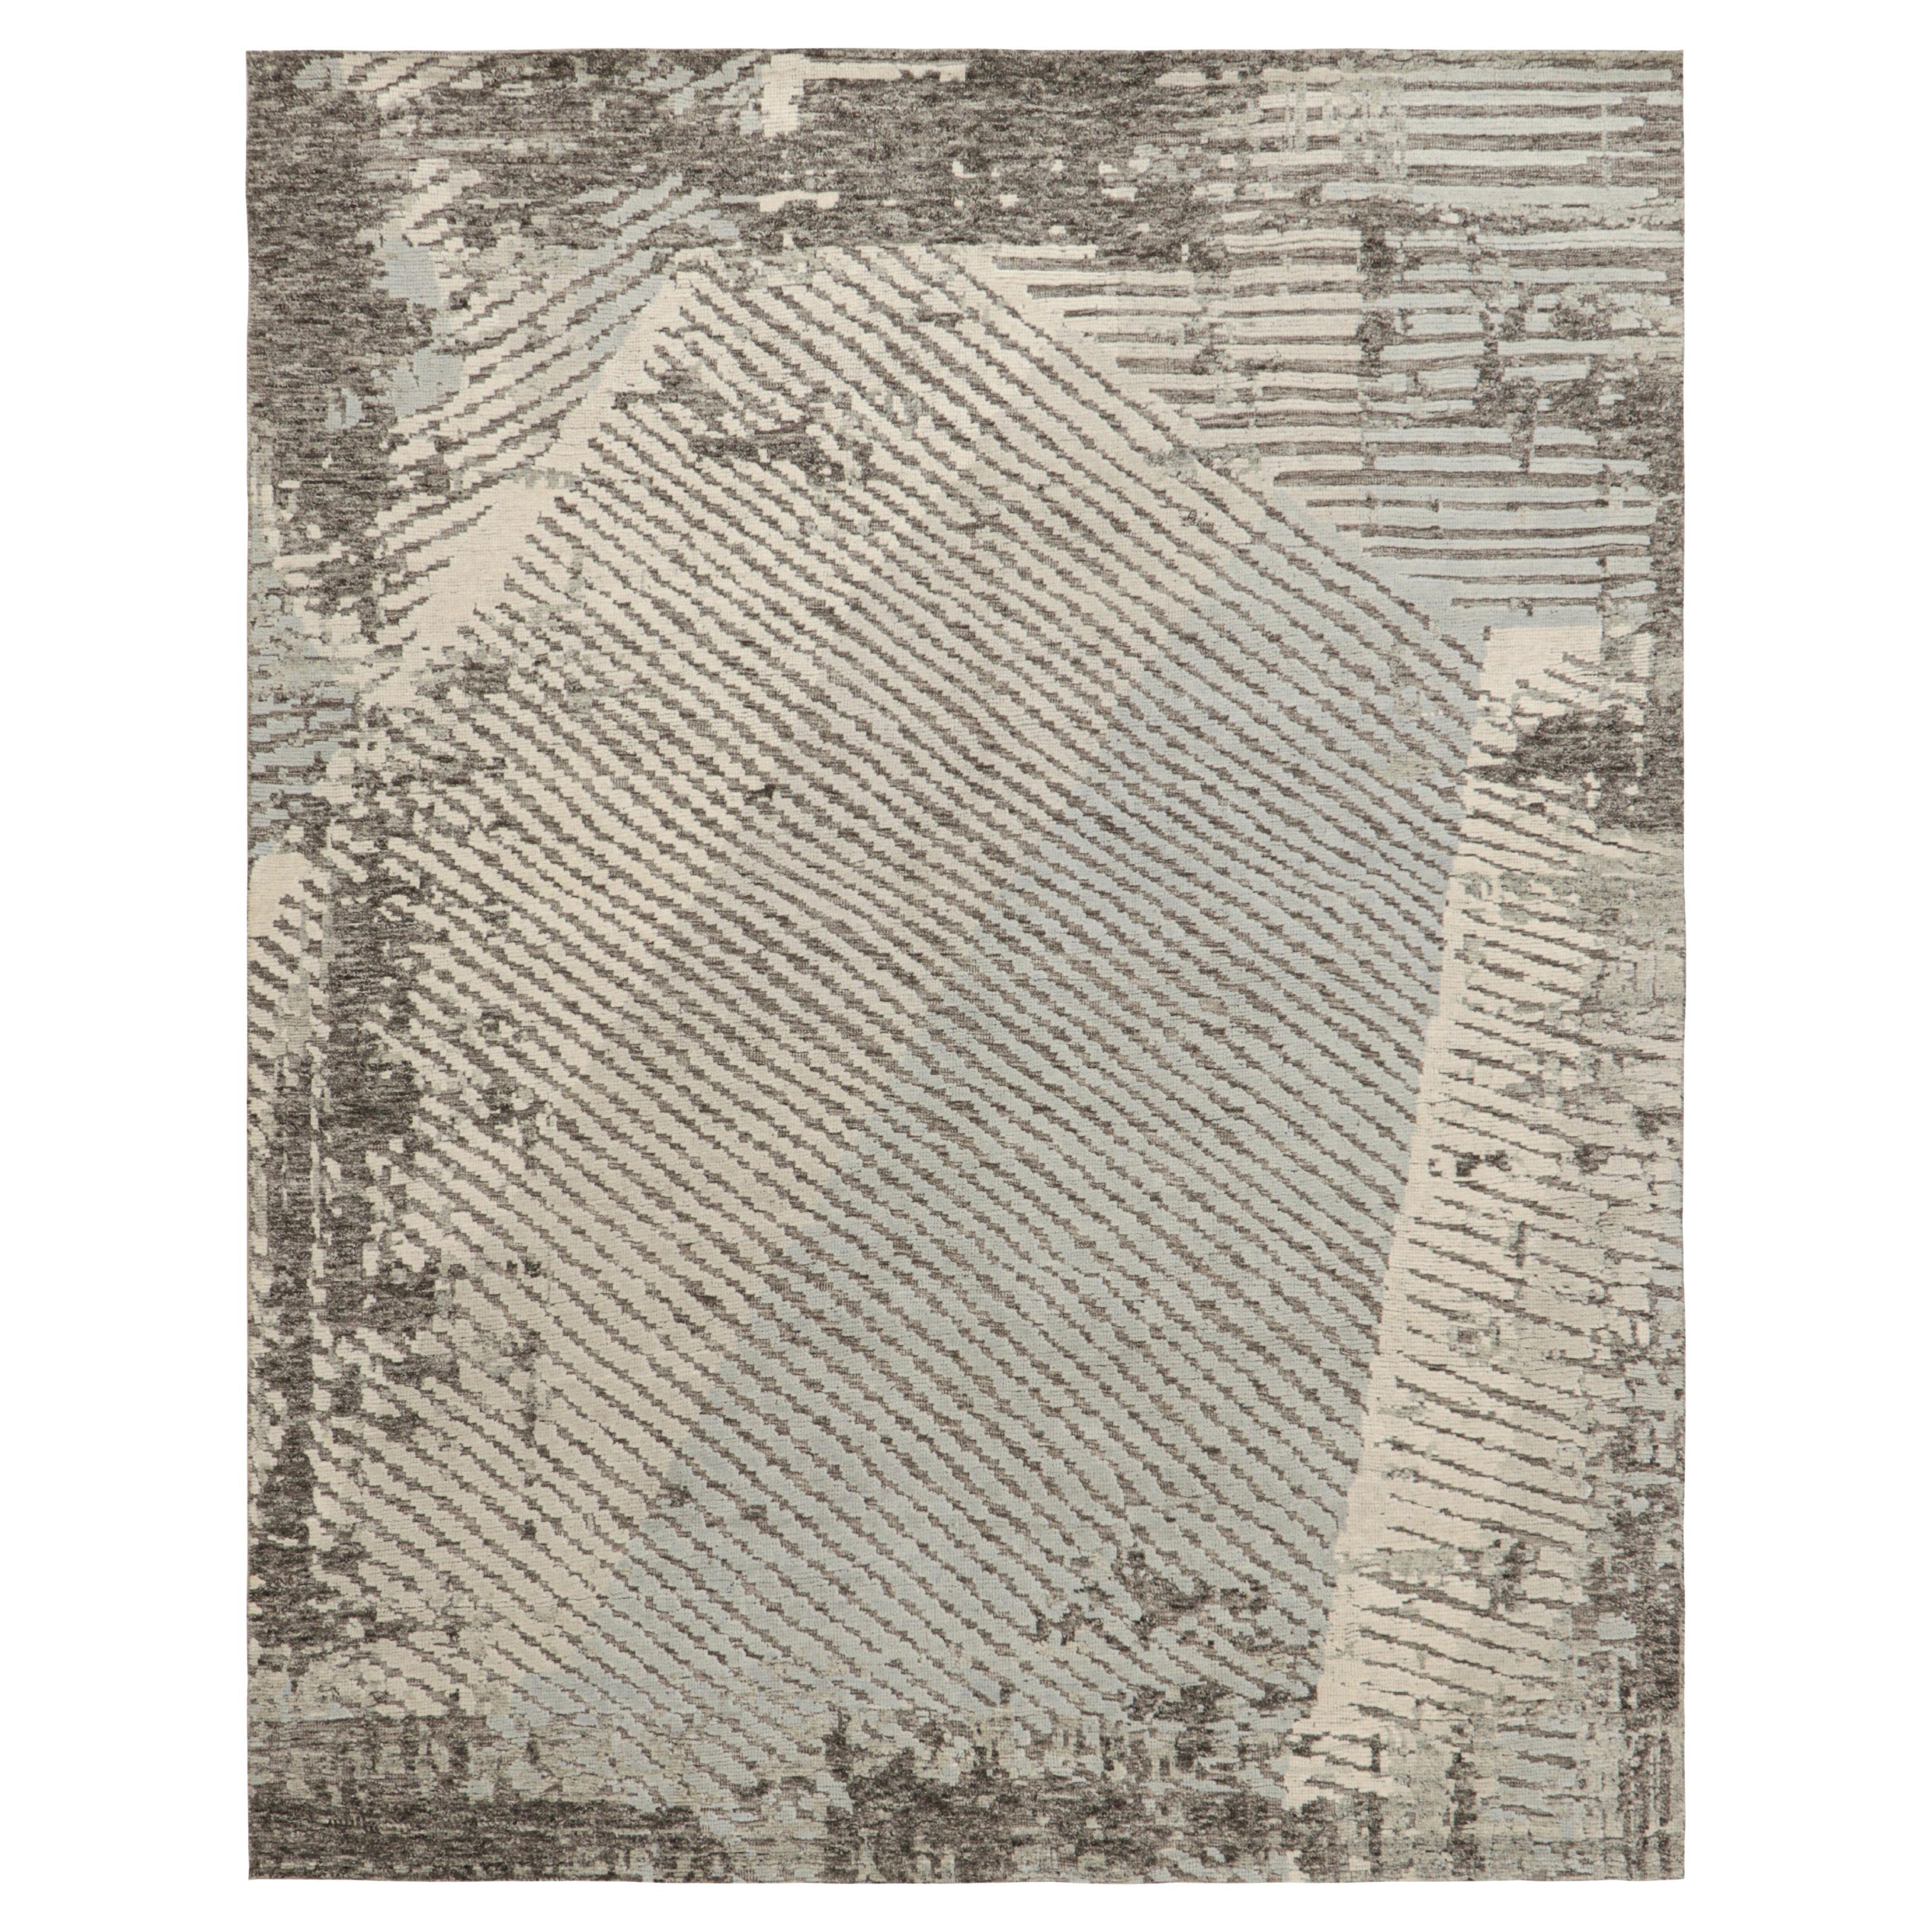 Rug & Kilim’s Abstract Rug in Gray, Blue And White Geometric Patterns For Sale